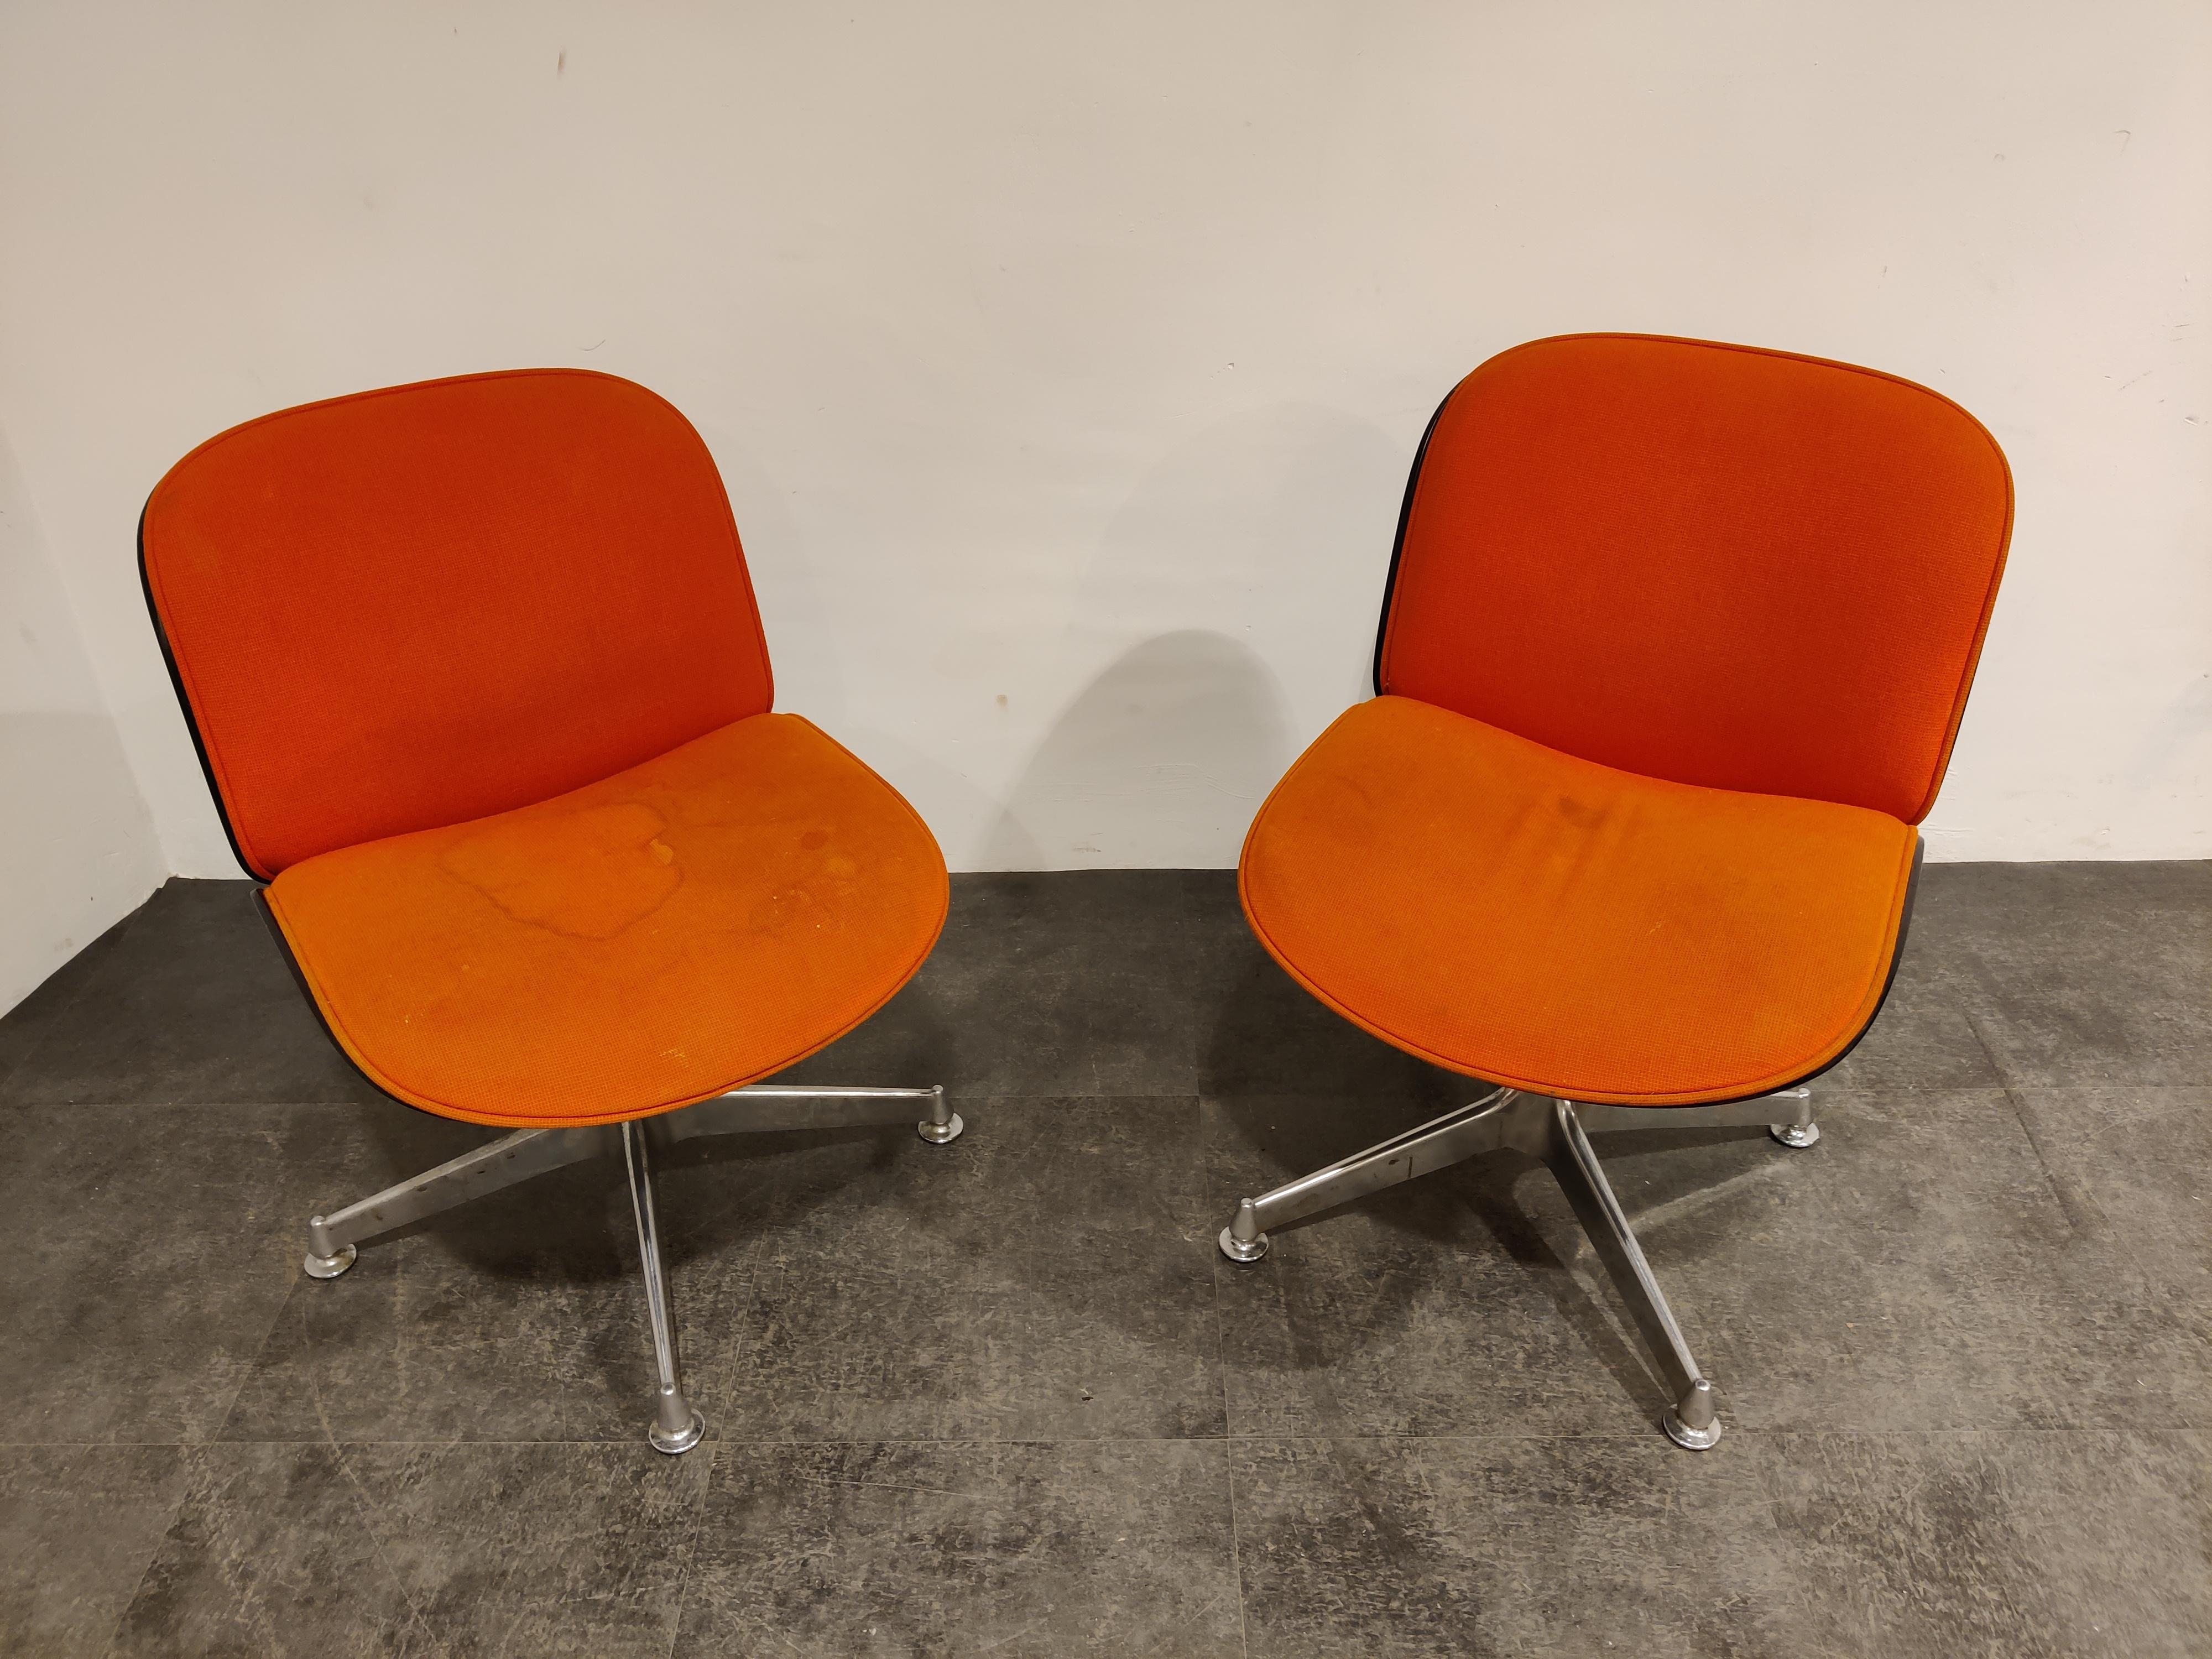 Mid century rosewood swivel/desk chairs by Ico Parisi for MIM Roma. (Mobili Italiani Moderni)

They come in their original orange fabric which is stained, we can have them reupholstered for you (inquire for more information)

Frames and base is